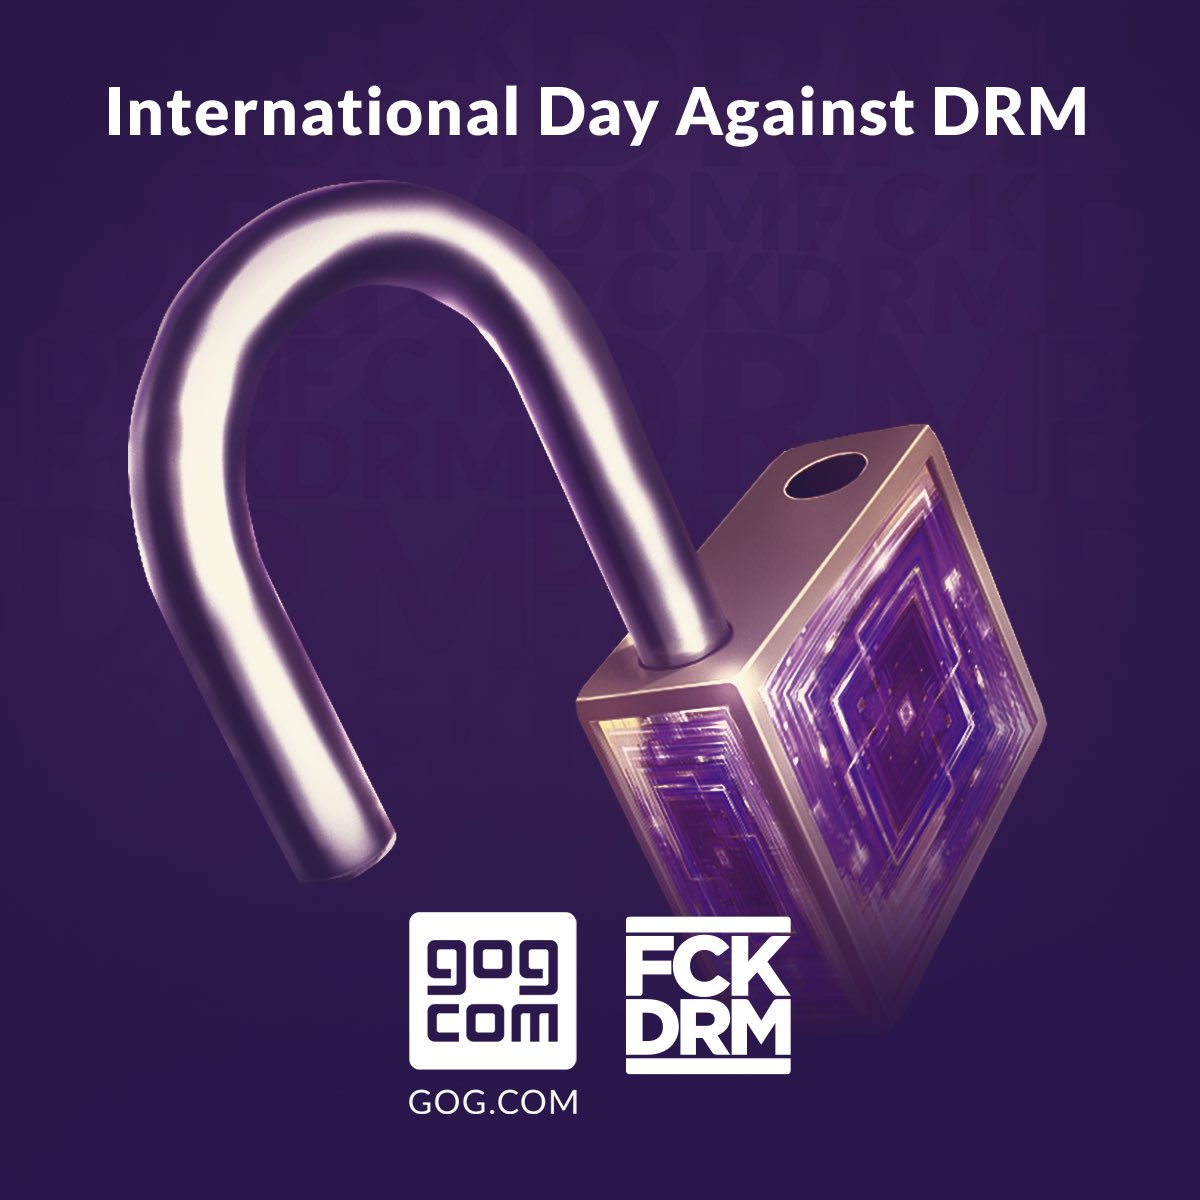 DRM-free philosophy is especially close to our hearts at GOG.COM, so join us in celebrating the International Day Against DRM! 💜

Help spread knowledge about the benefits of DRM-free games, movies, & other forms of media ☺️

👉 bit.ly/2MwoAH4 | #FCKDRM